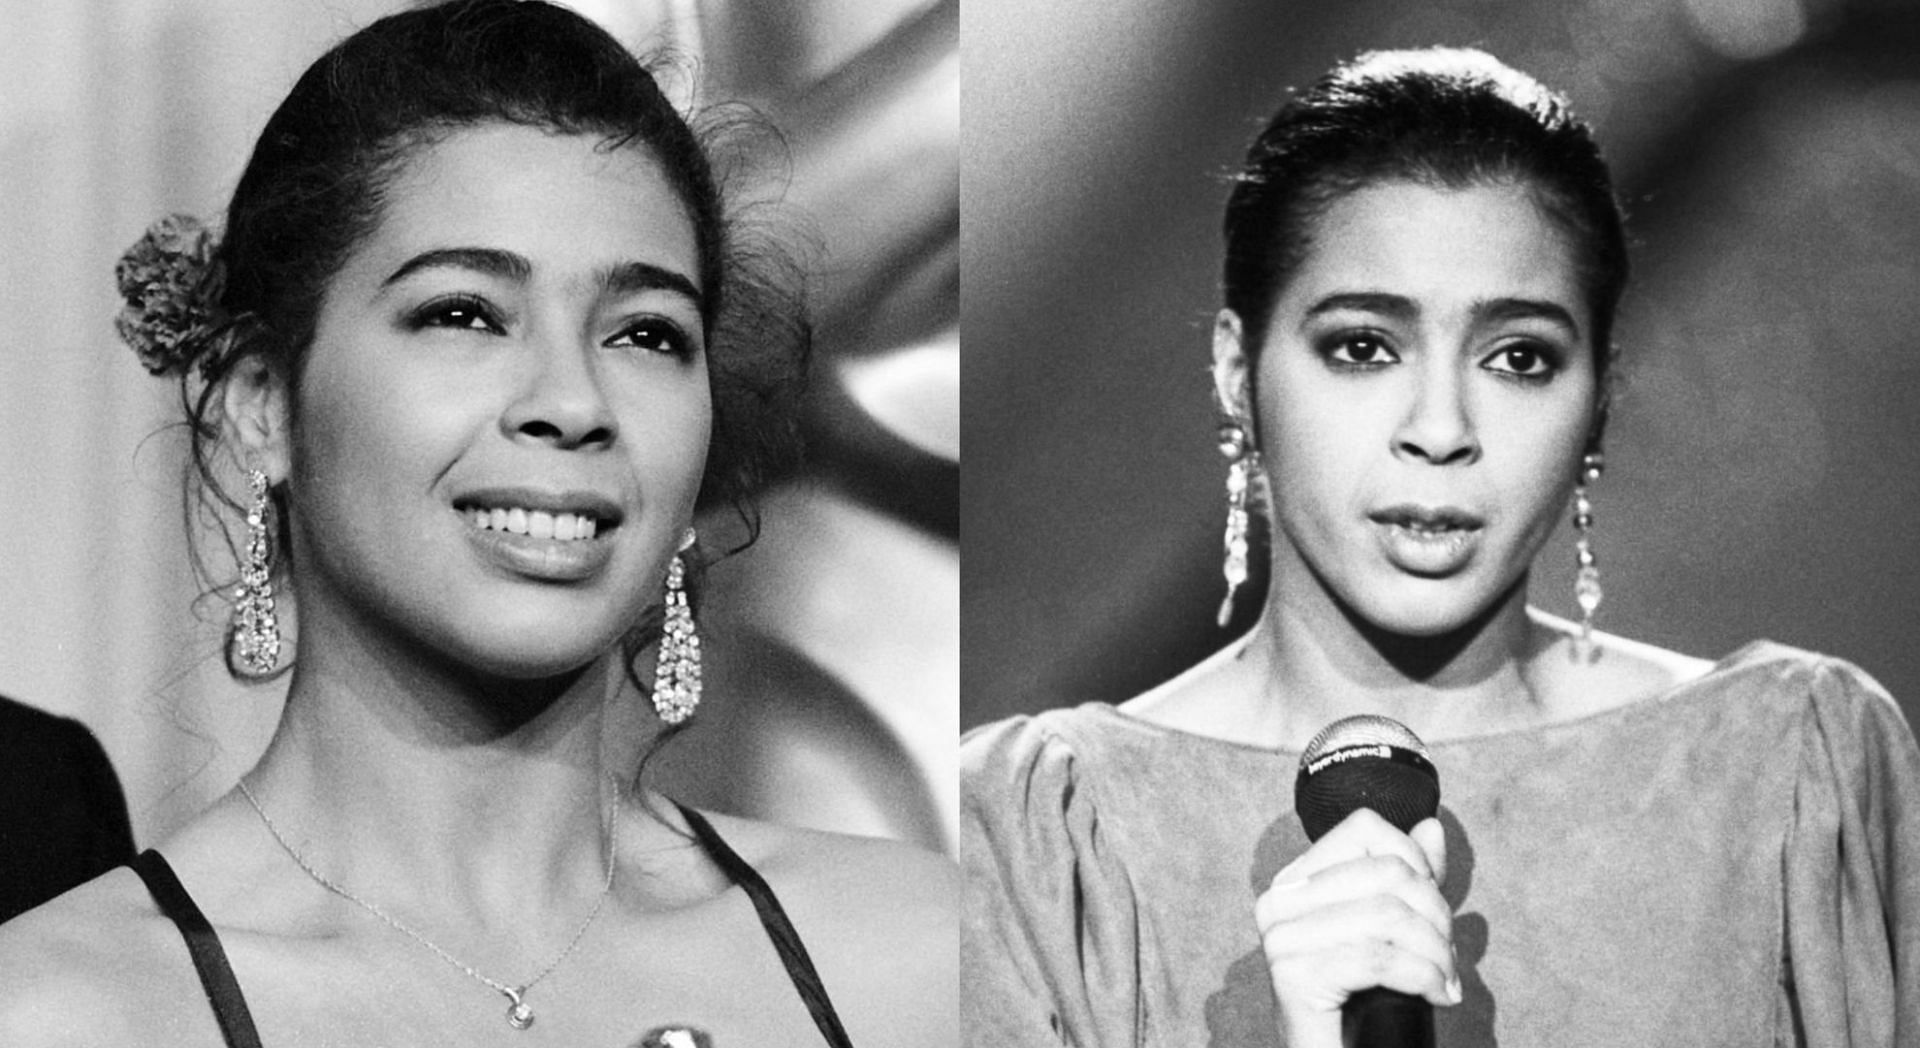 Oscar Award-winning singer and actress Irene Cara has passed away at the age of 63 (Image via Getty Images)